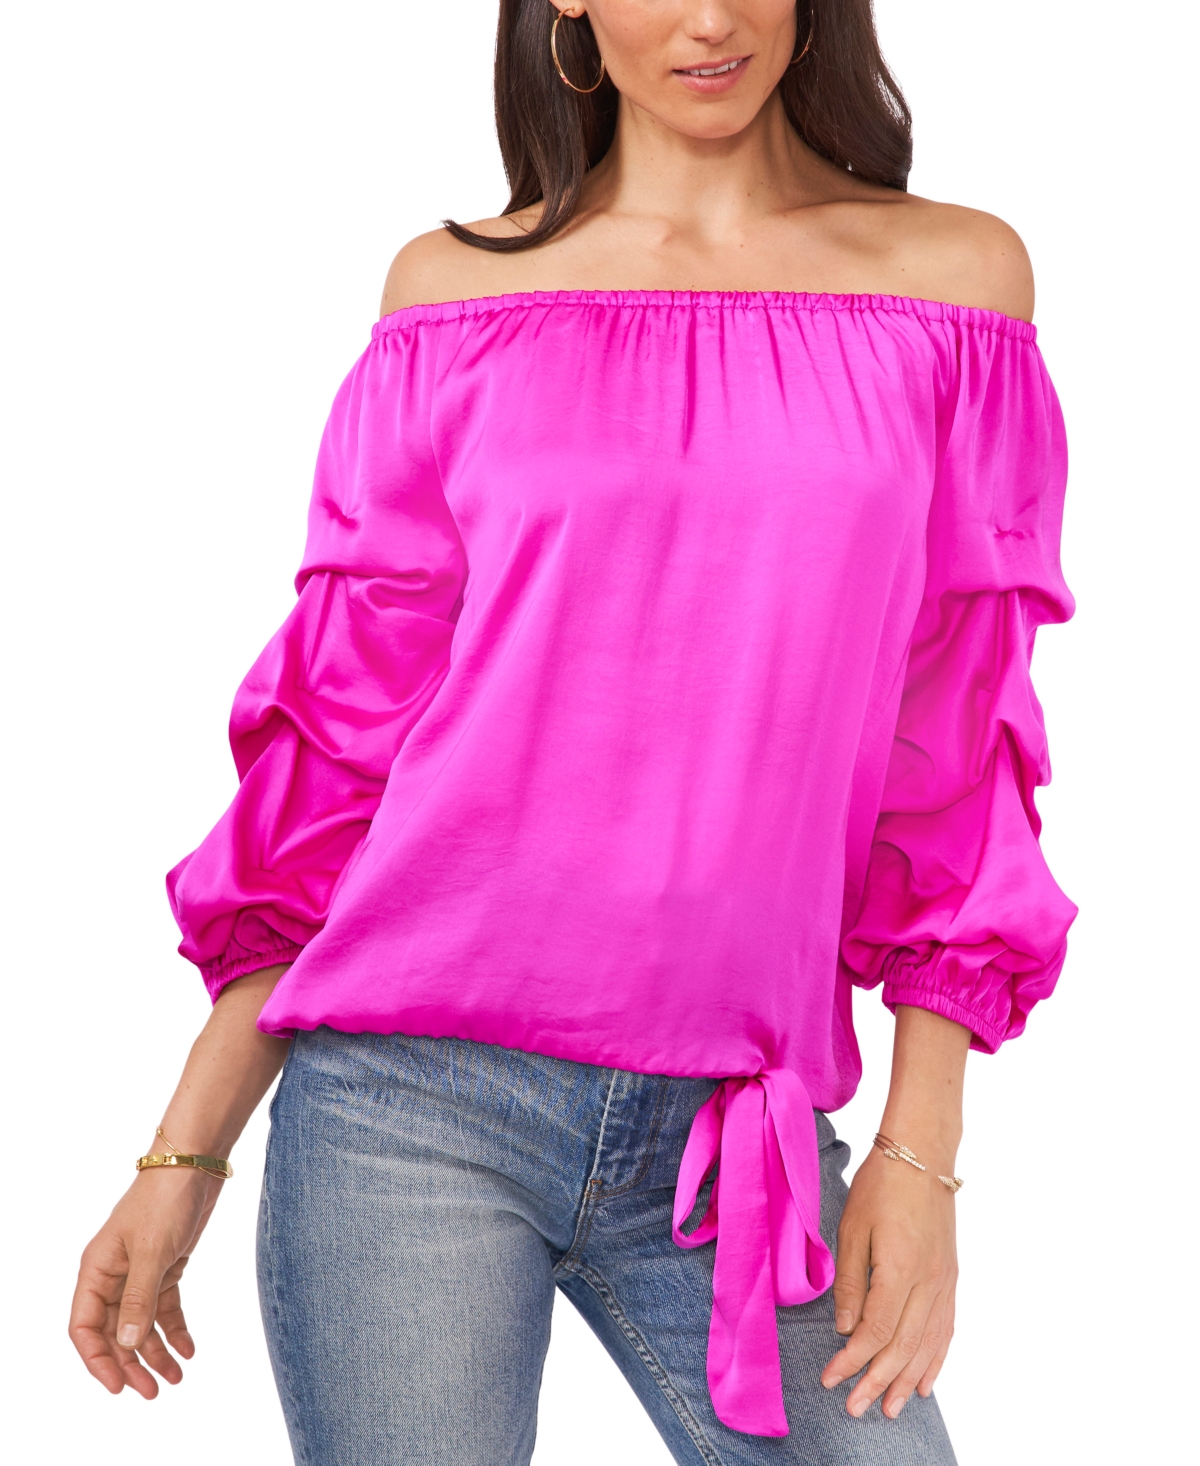 Vince Camuto Women's Long Sleeve Off The Shoulder Rumple Blouse